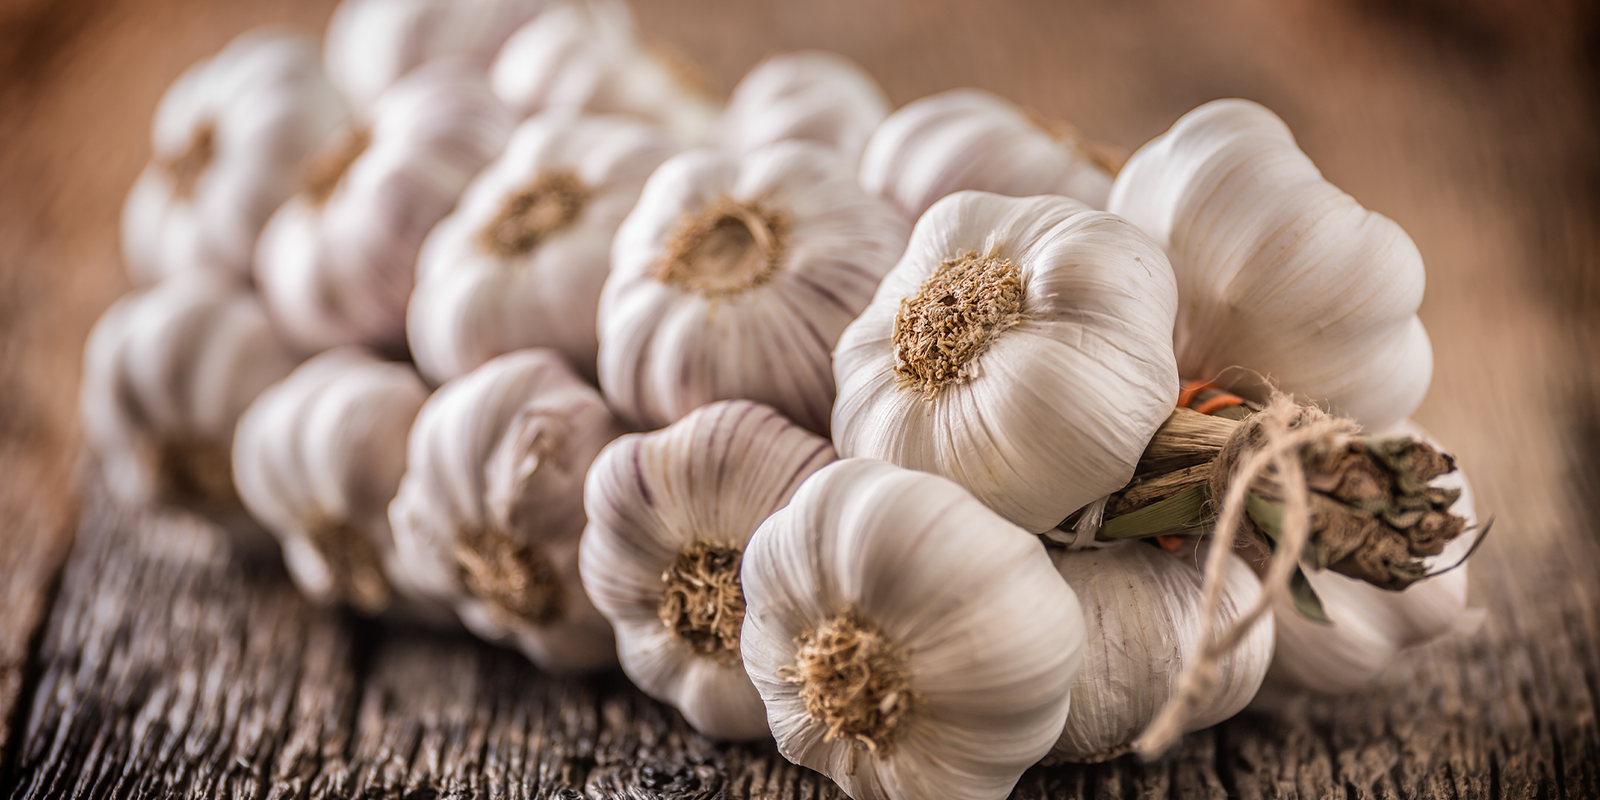 Garlic extract: how it impacts testosterone levels